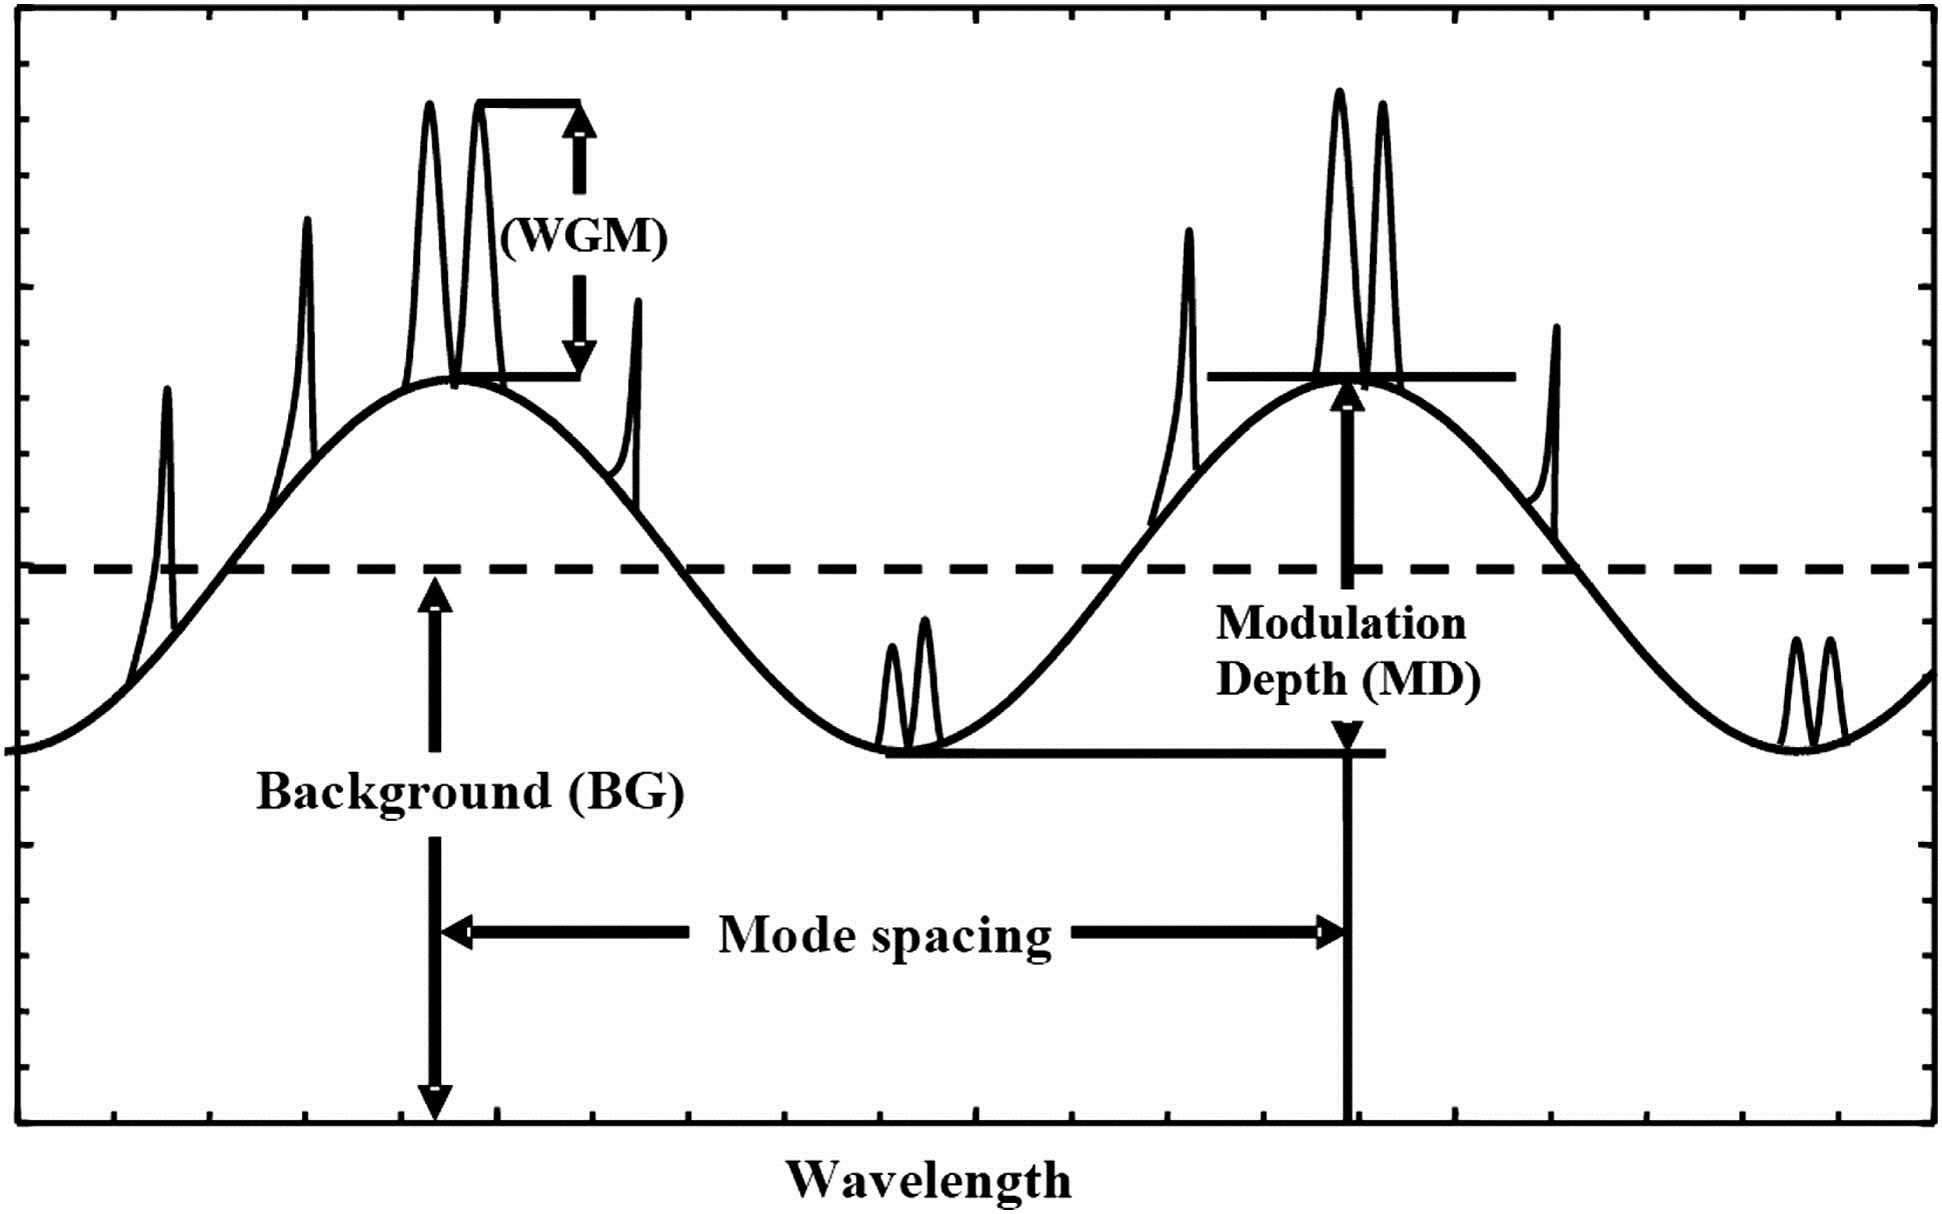 Illustration of an elastic scattering spectrum from a microsphere indicating the WGMs, the MD, the BG, and the spectral mode spacing (Δλ).